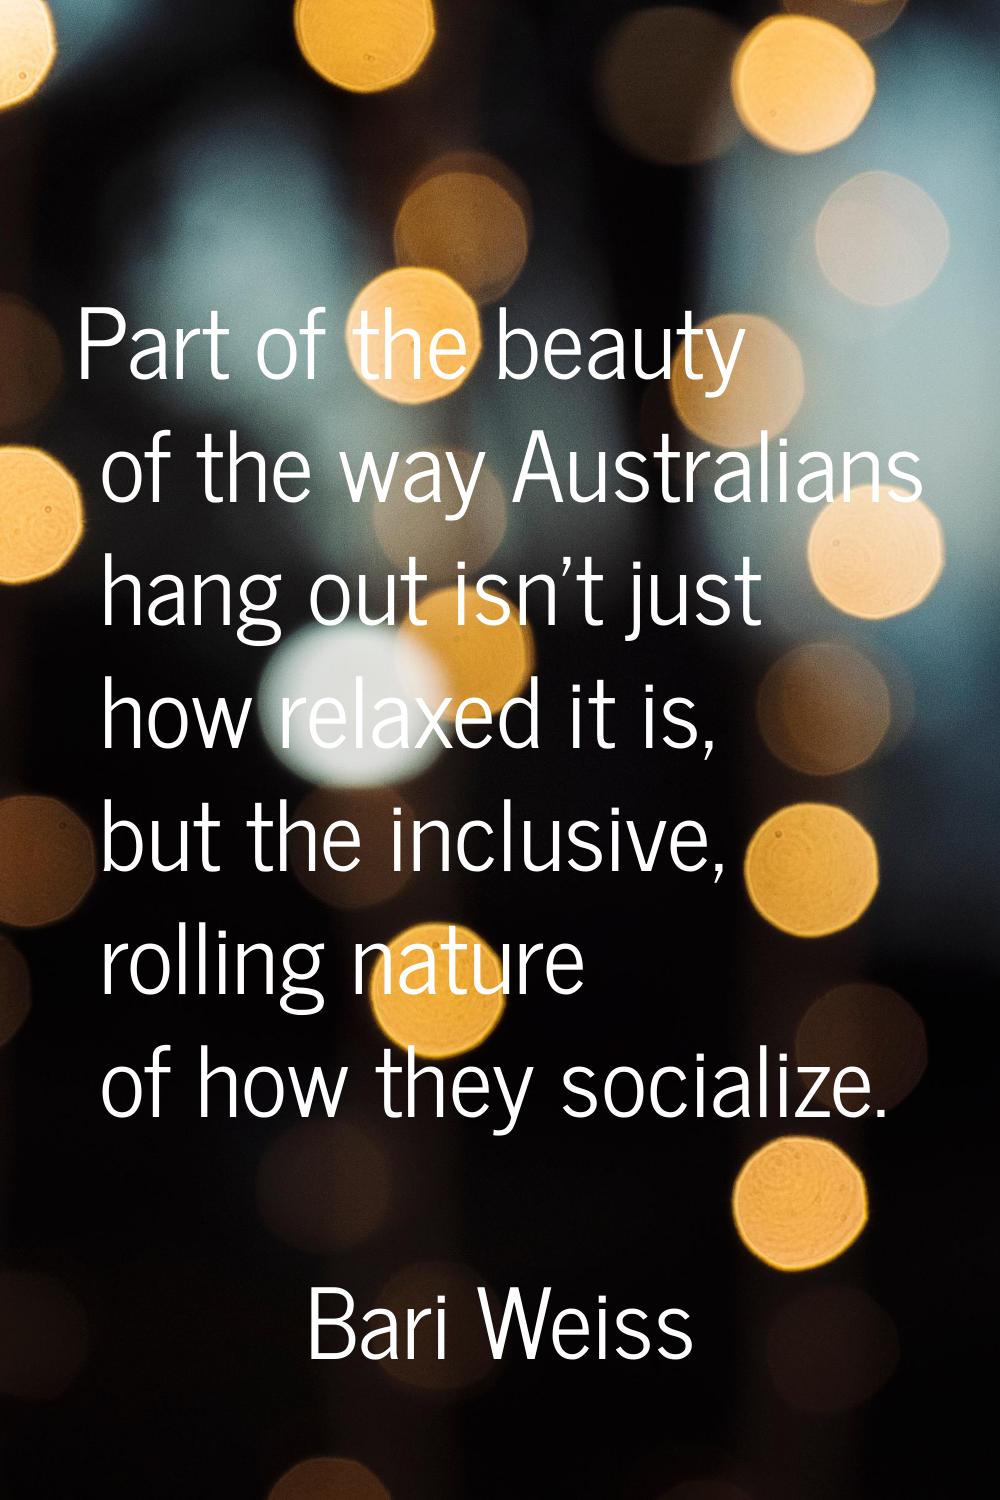 Part of the beauty of the way Australians hang out isn't just how relaxed it is, but the inclusive,